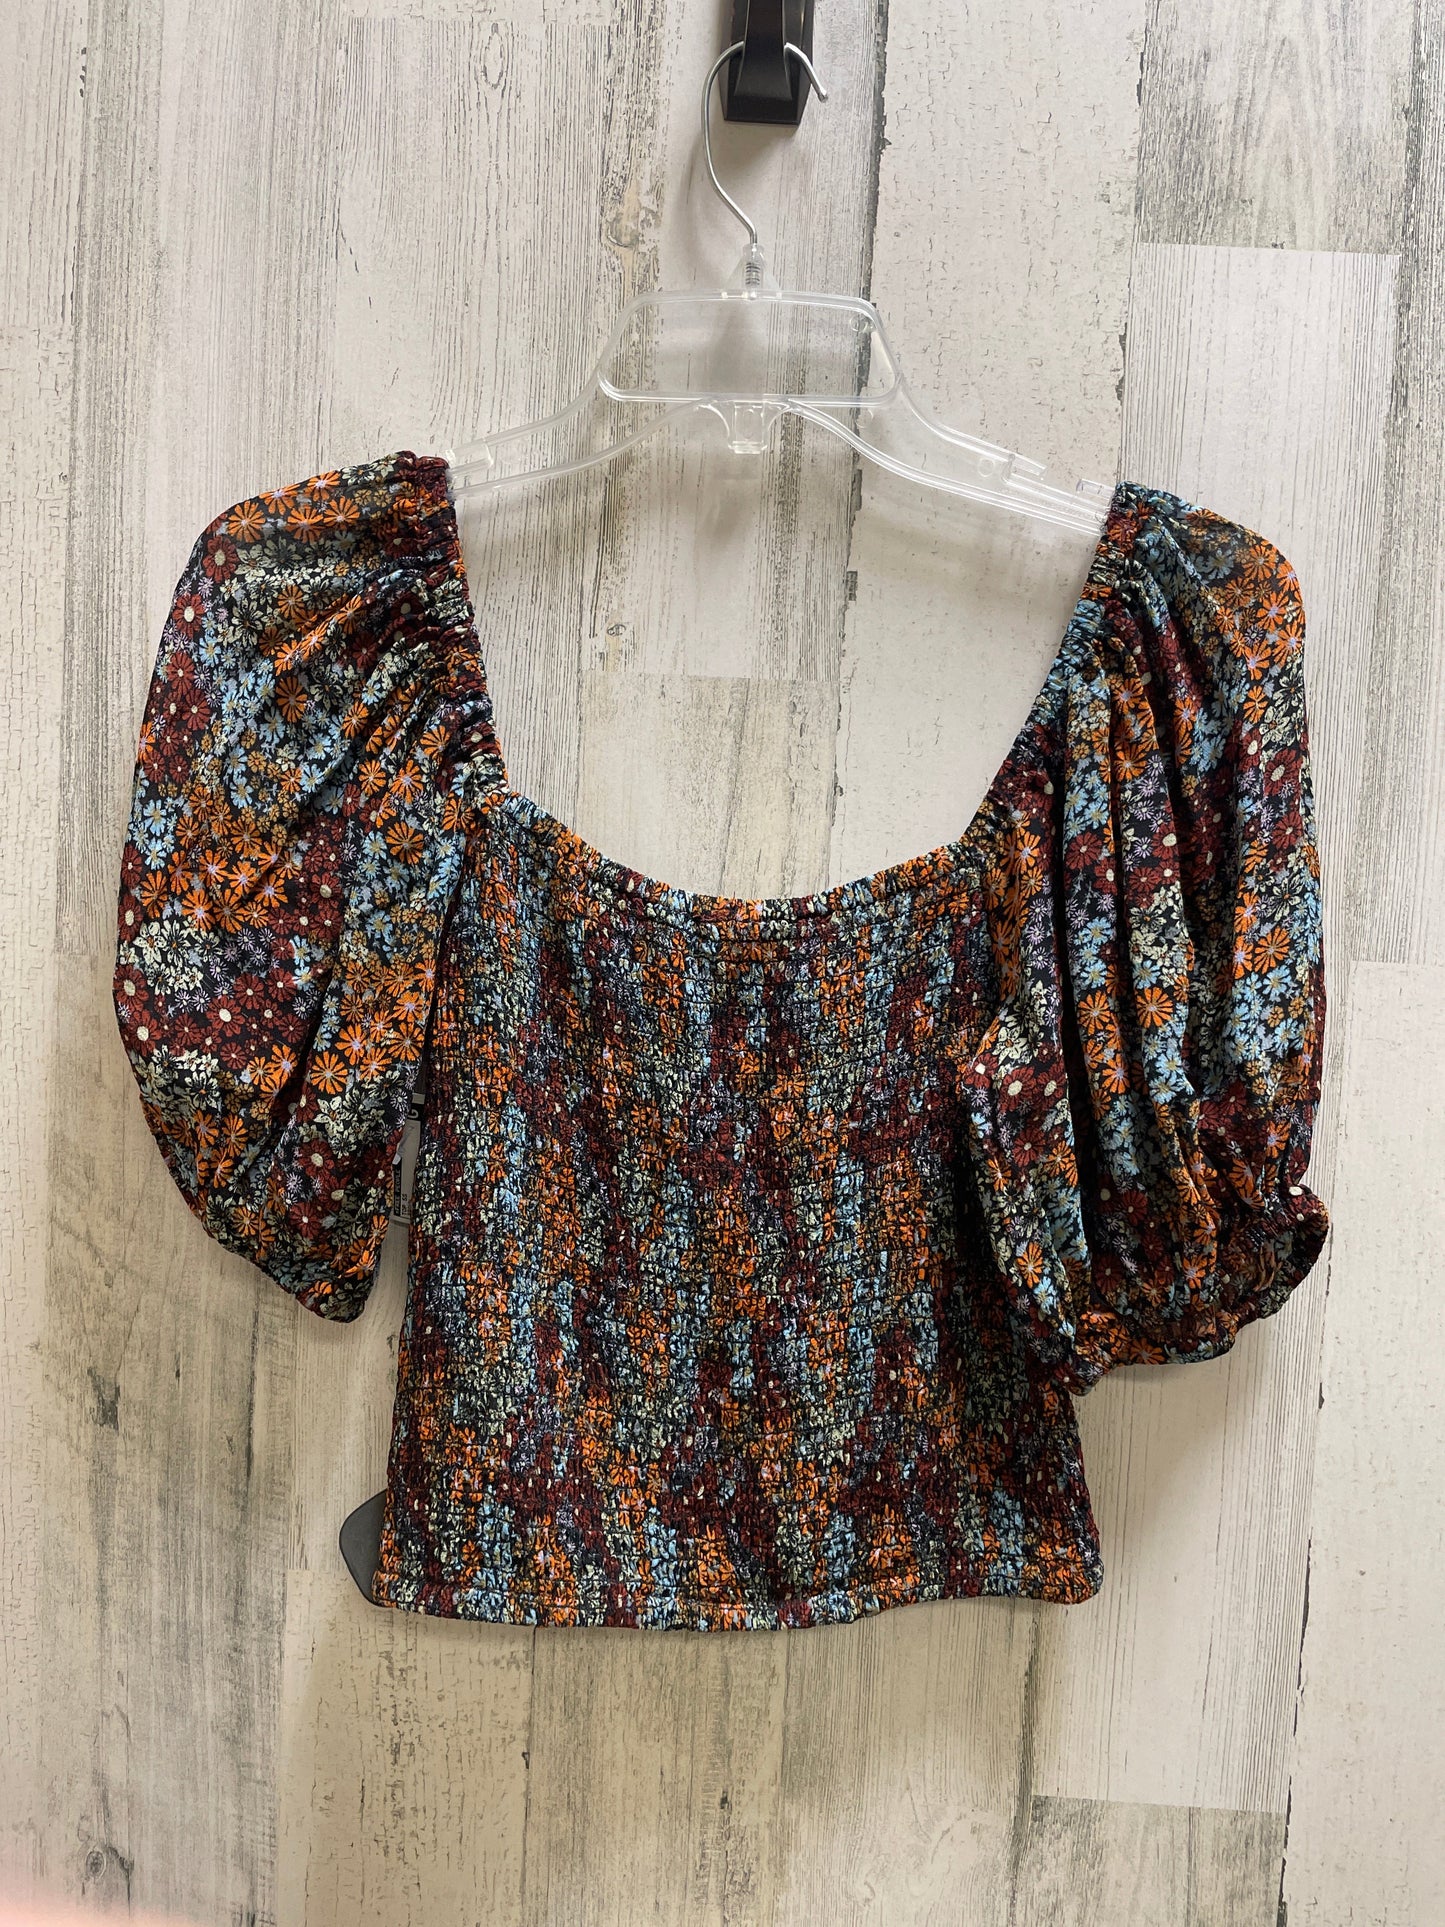 Brown Top Short Sleeve Free People, Size Xs